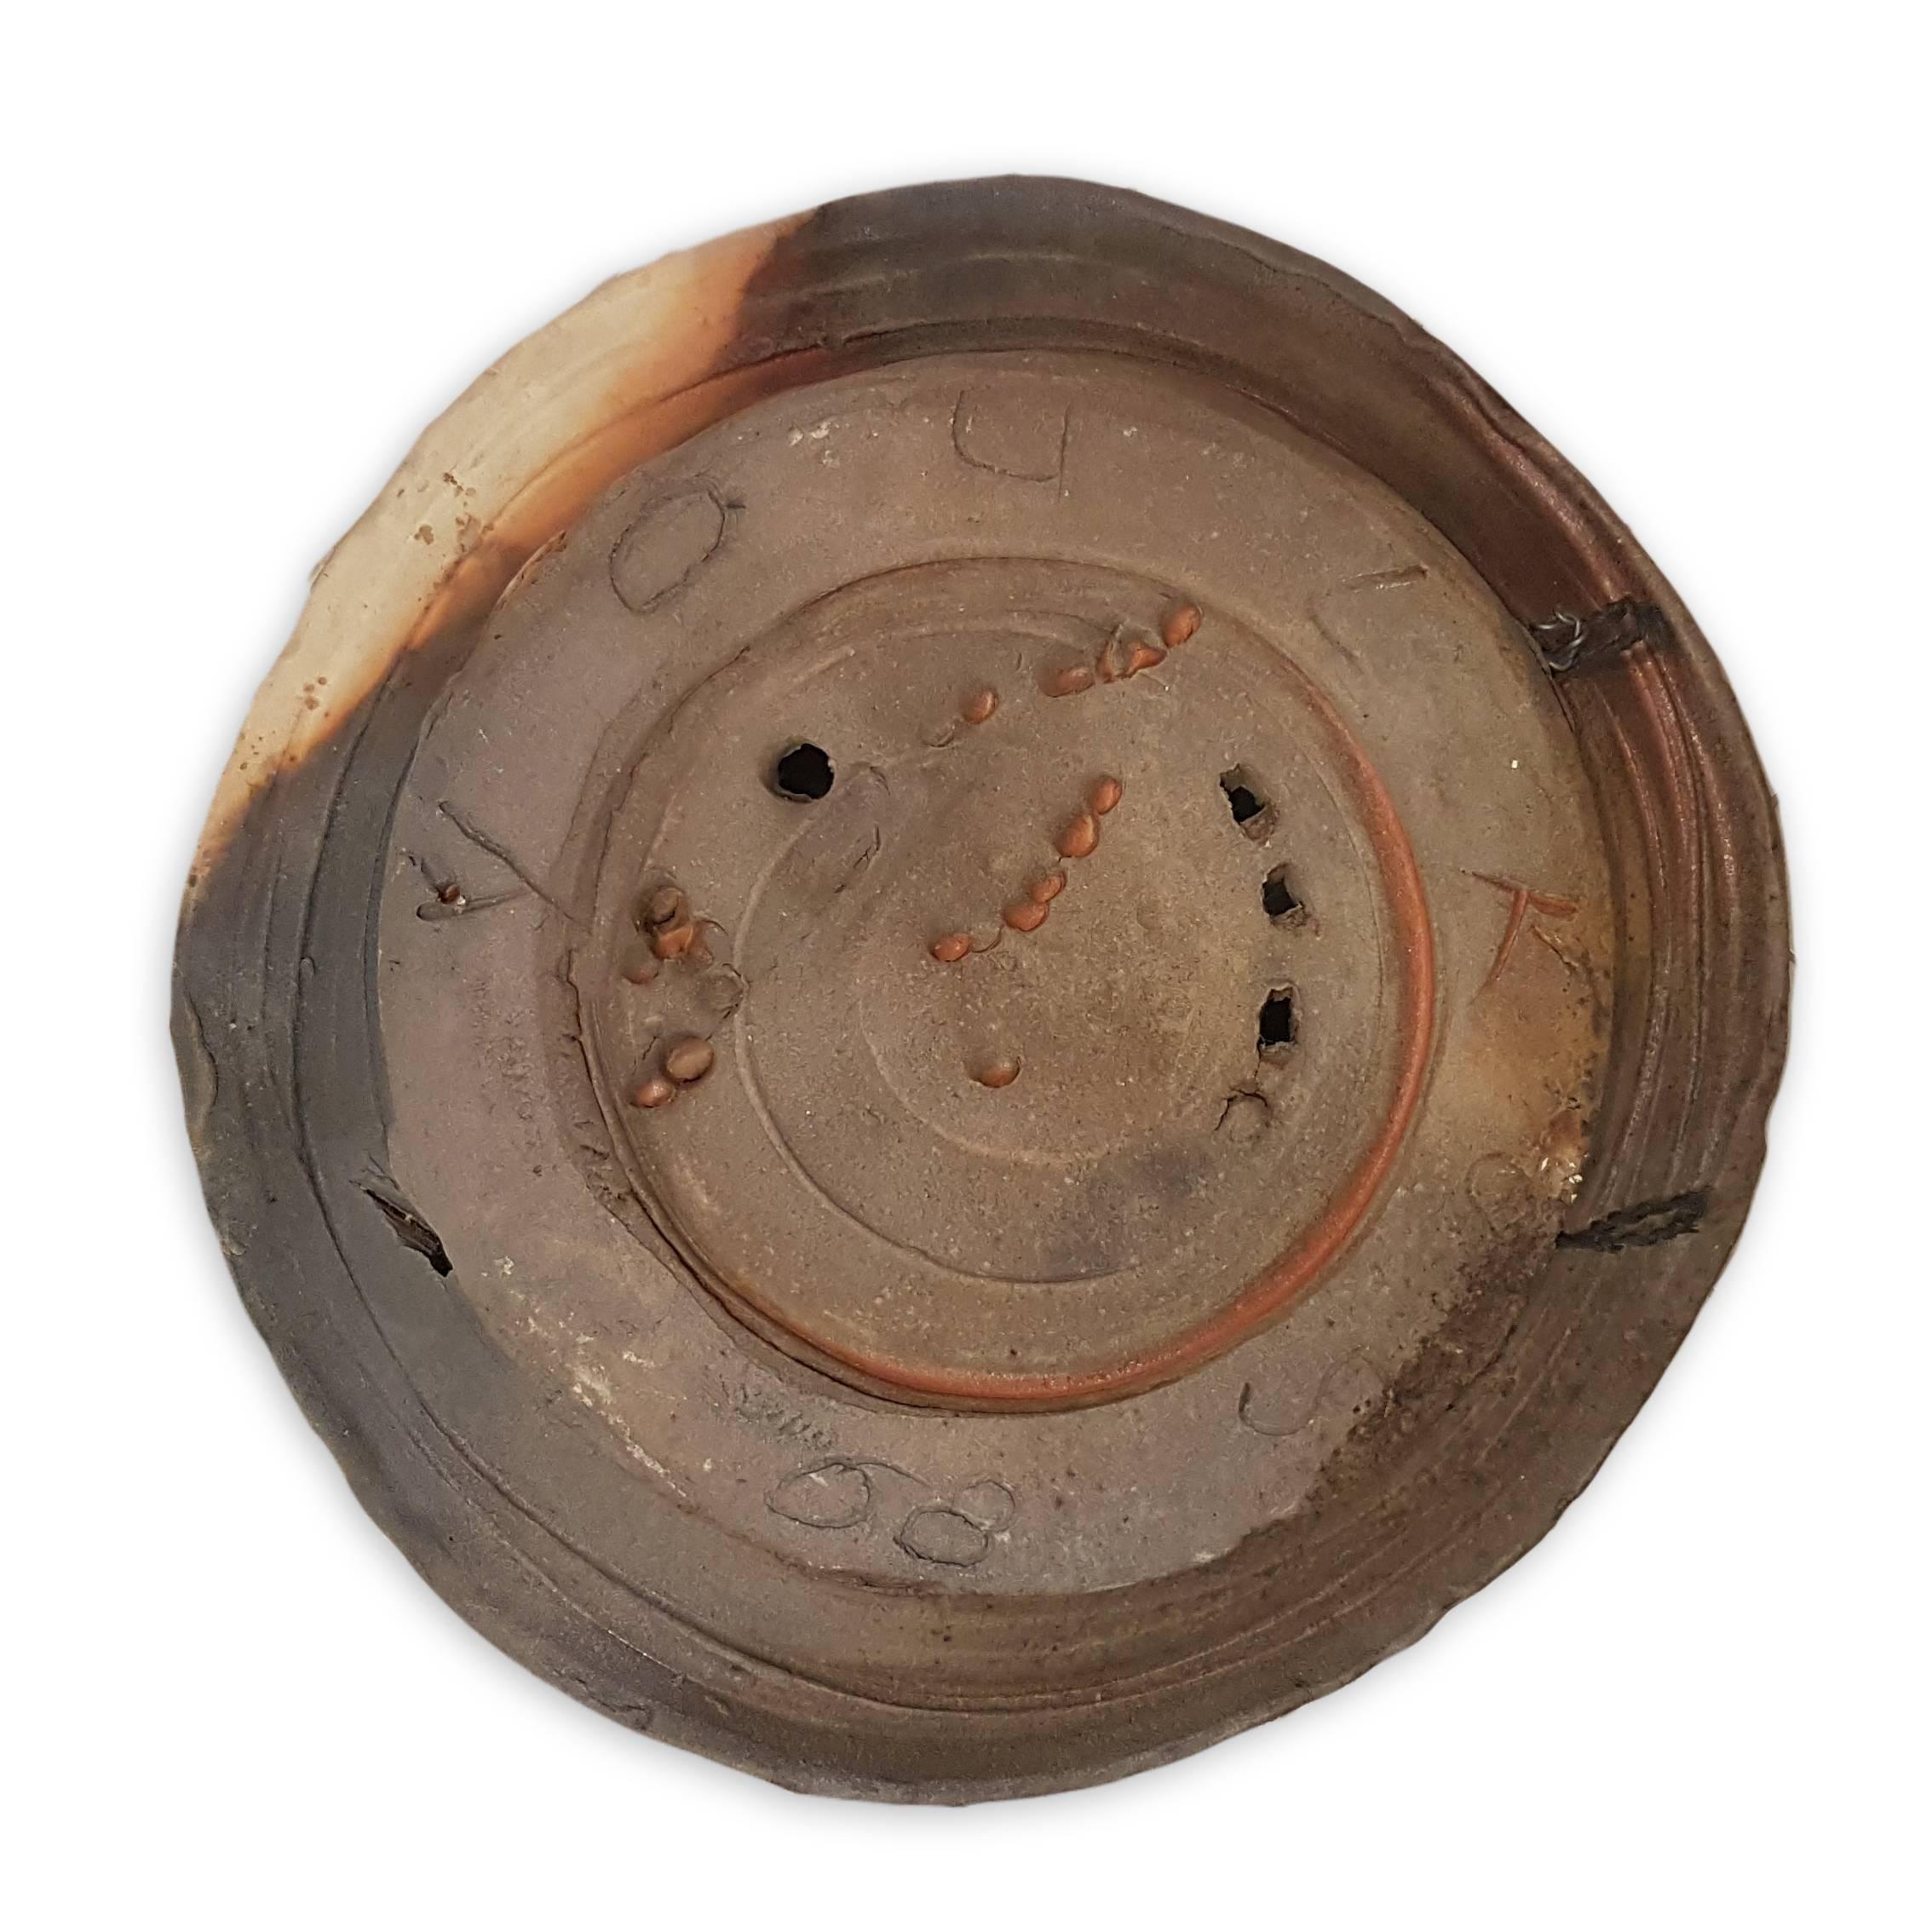 stoneware and woodfired

Provenance - Charles Cowles Gallery, NYC
The Nevica Project

A West Coast potter and sculptor, Peter Voulkos (1924-2002) led in the development of pottery as an art form. . With an MFA from California College of Arts and